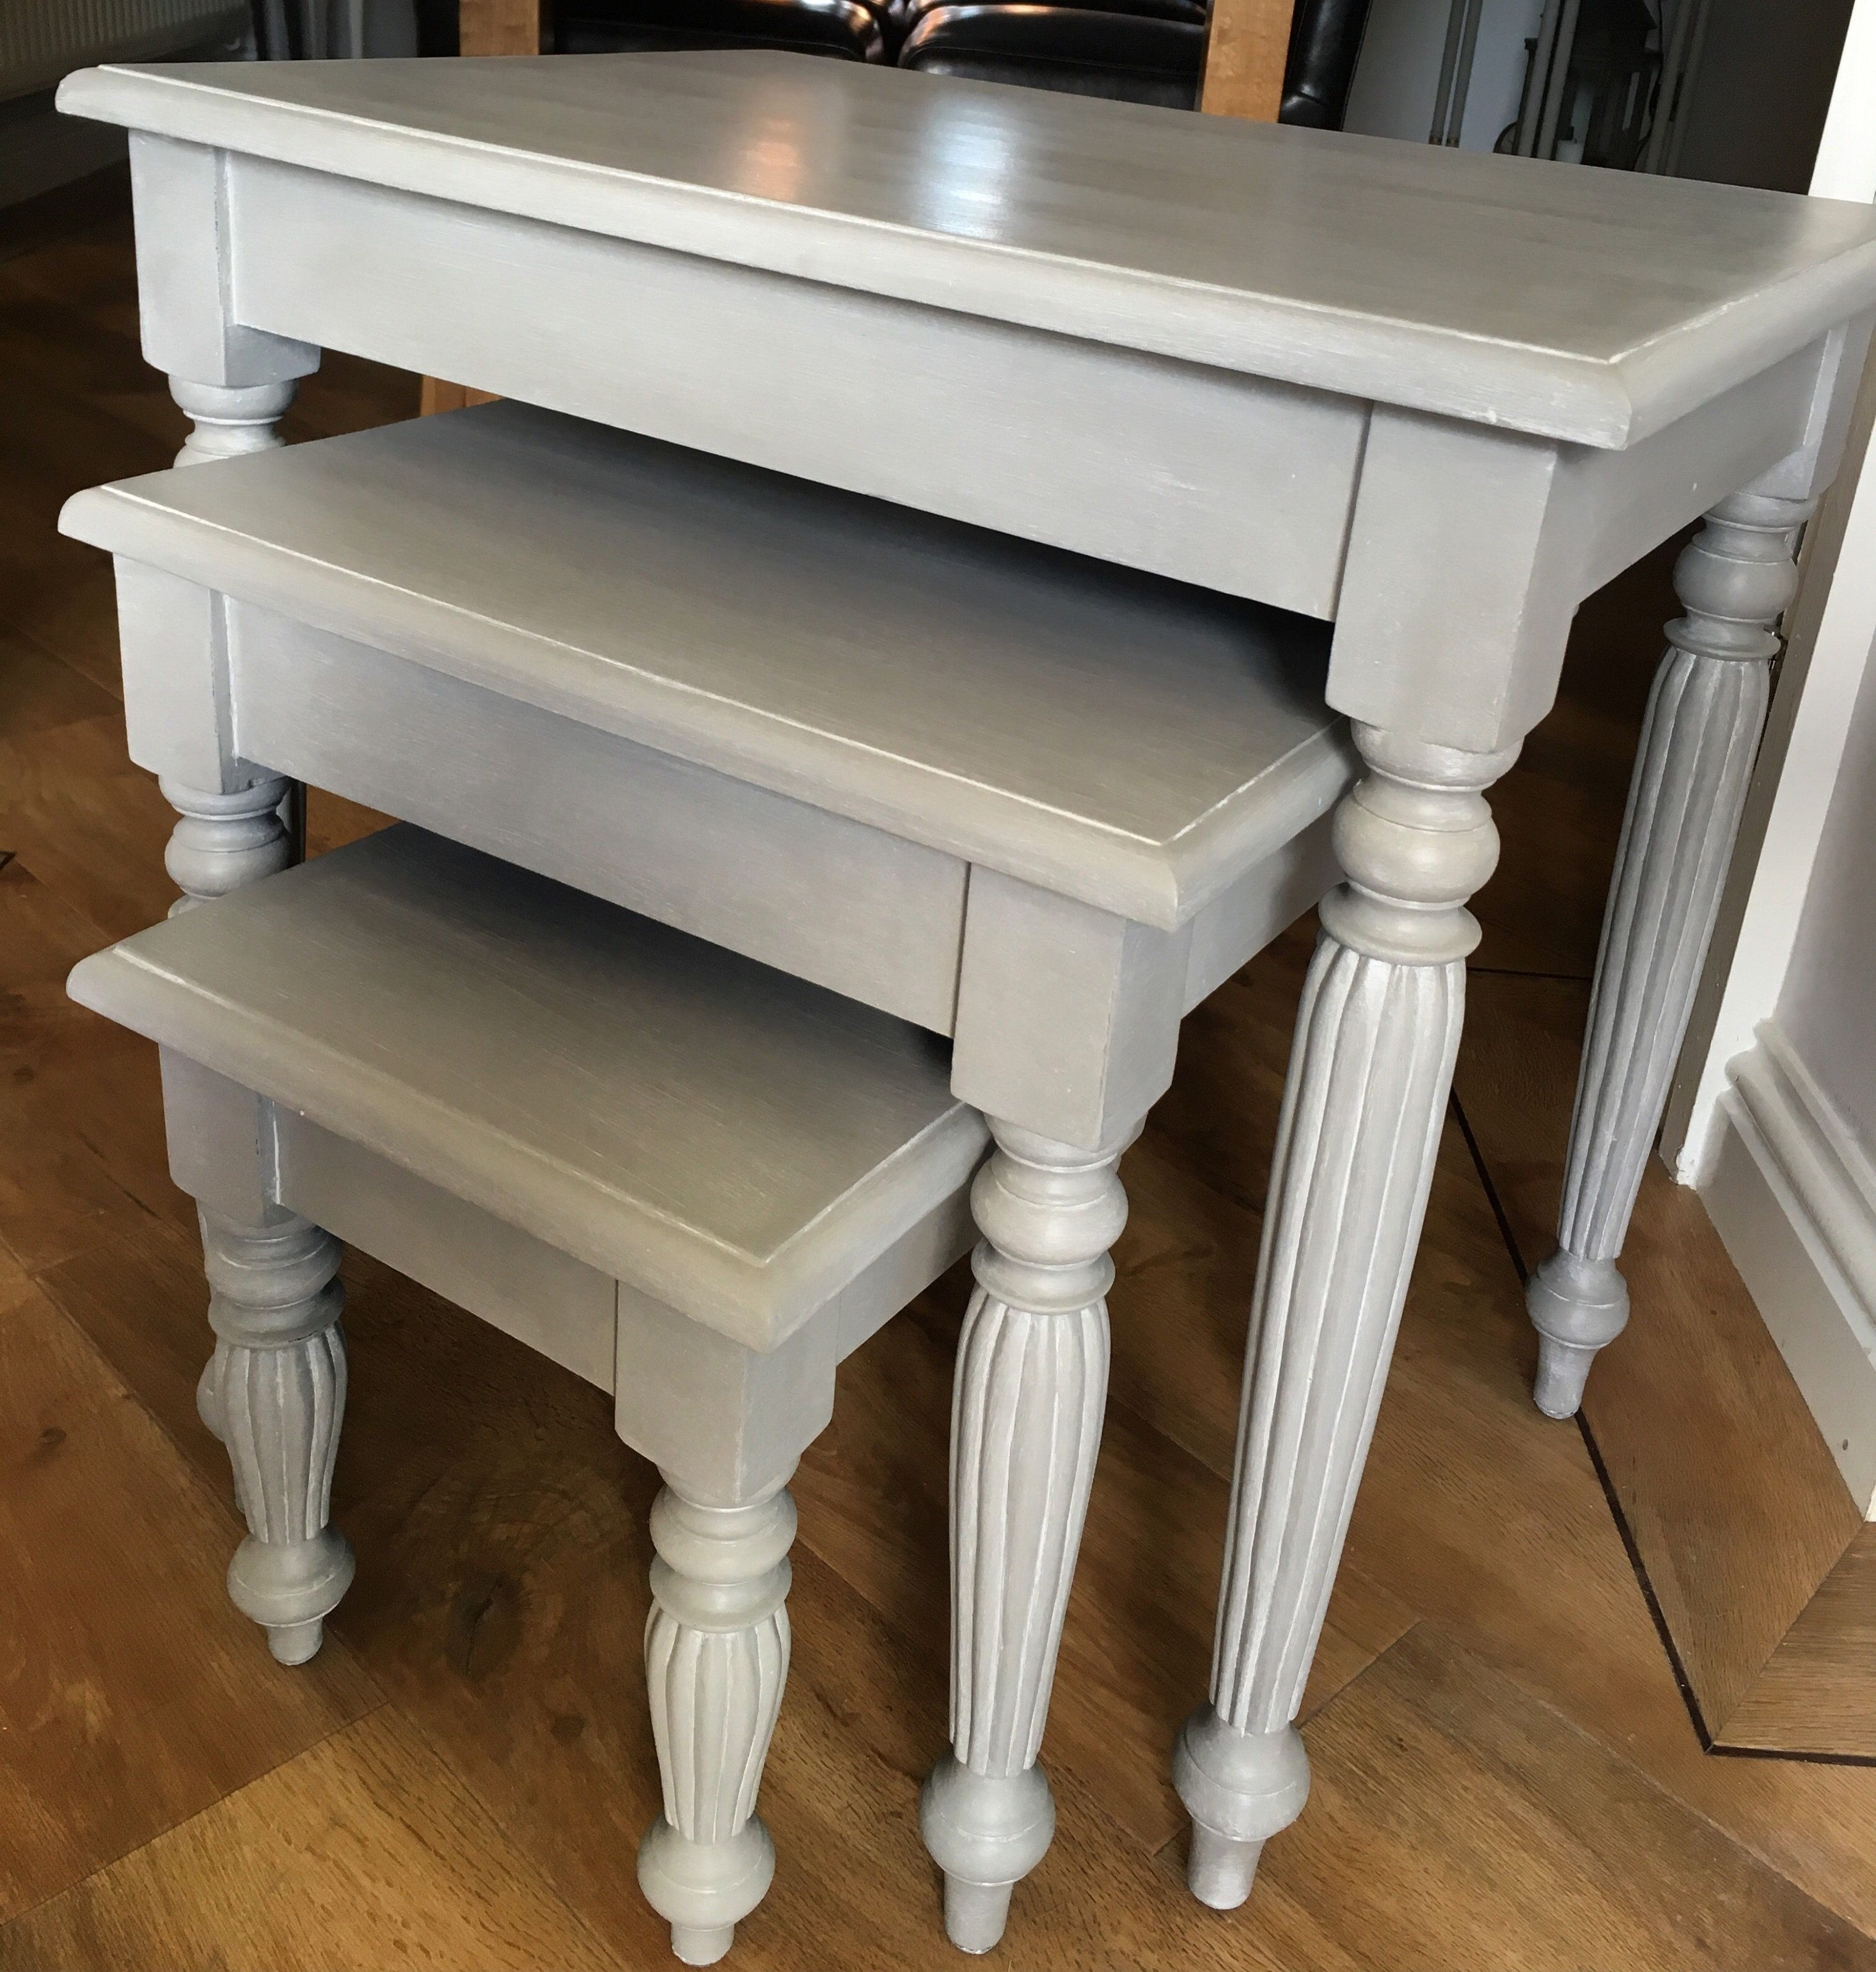 Nest Of Tables In Annie Sloan Paris Grey With Autentico White Wax ..